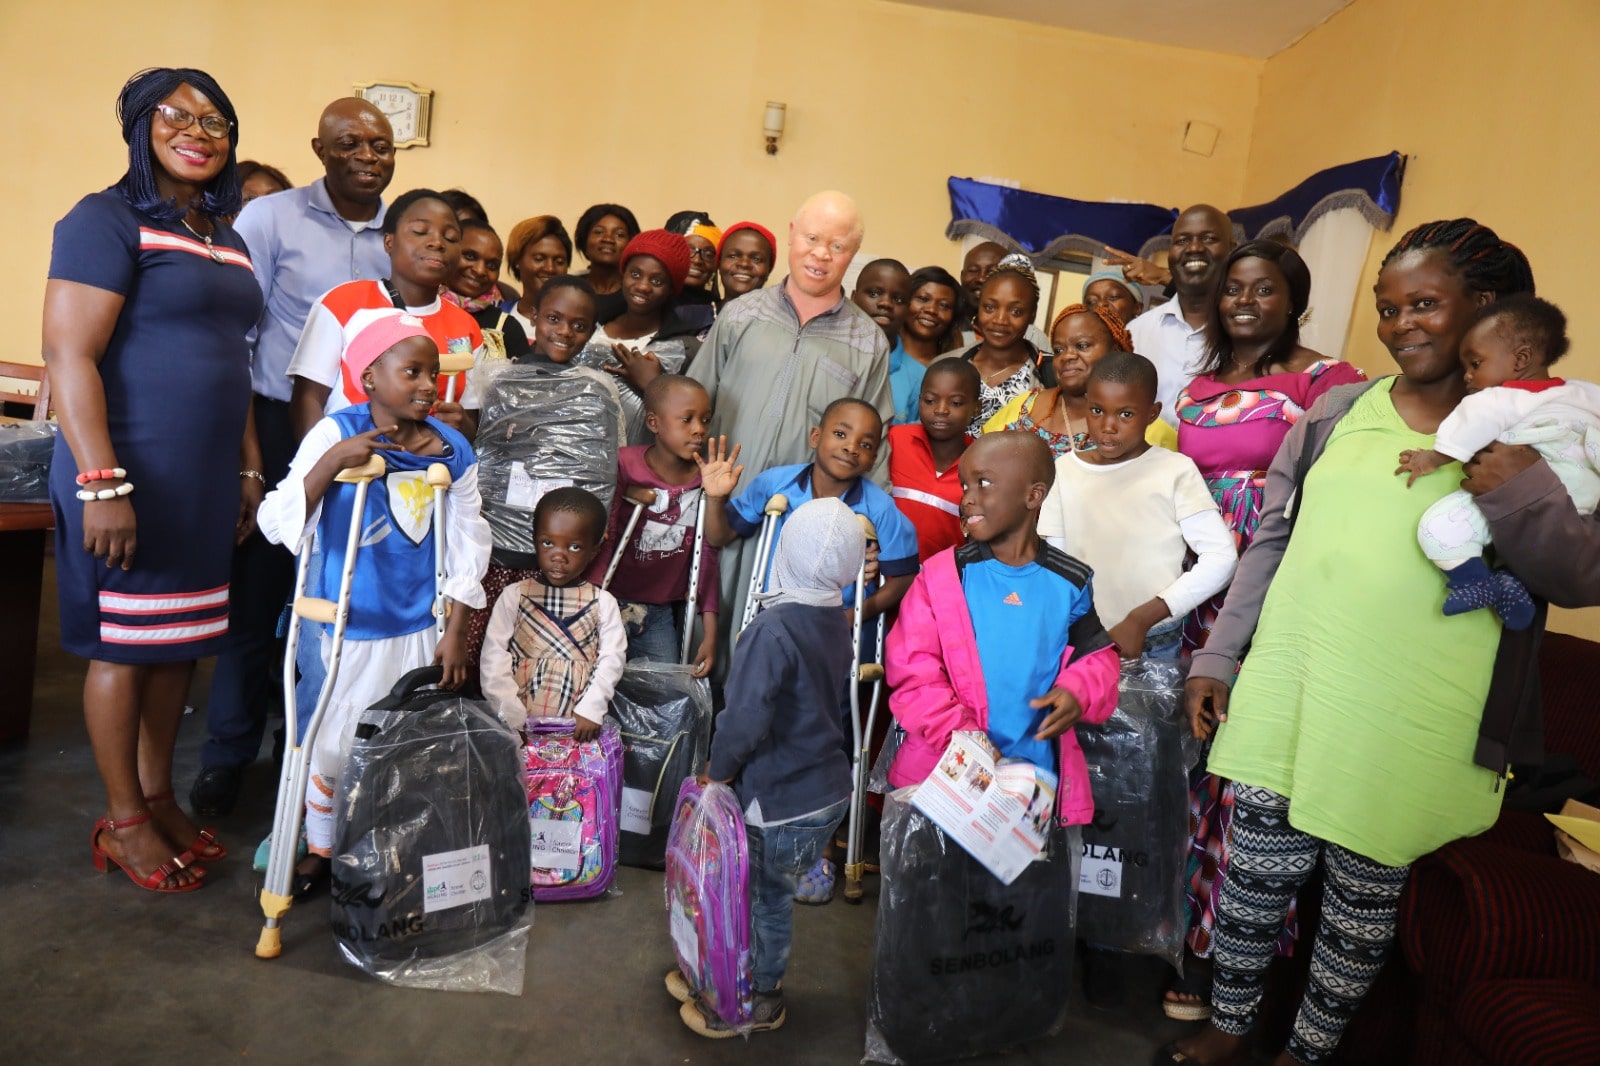 CWDs-grateful-for-donation-of-school-bags-a-livelihood-strategy-of-the-HHI-project